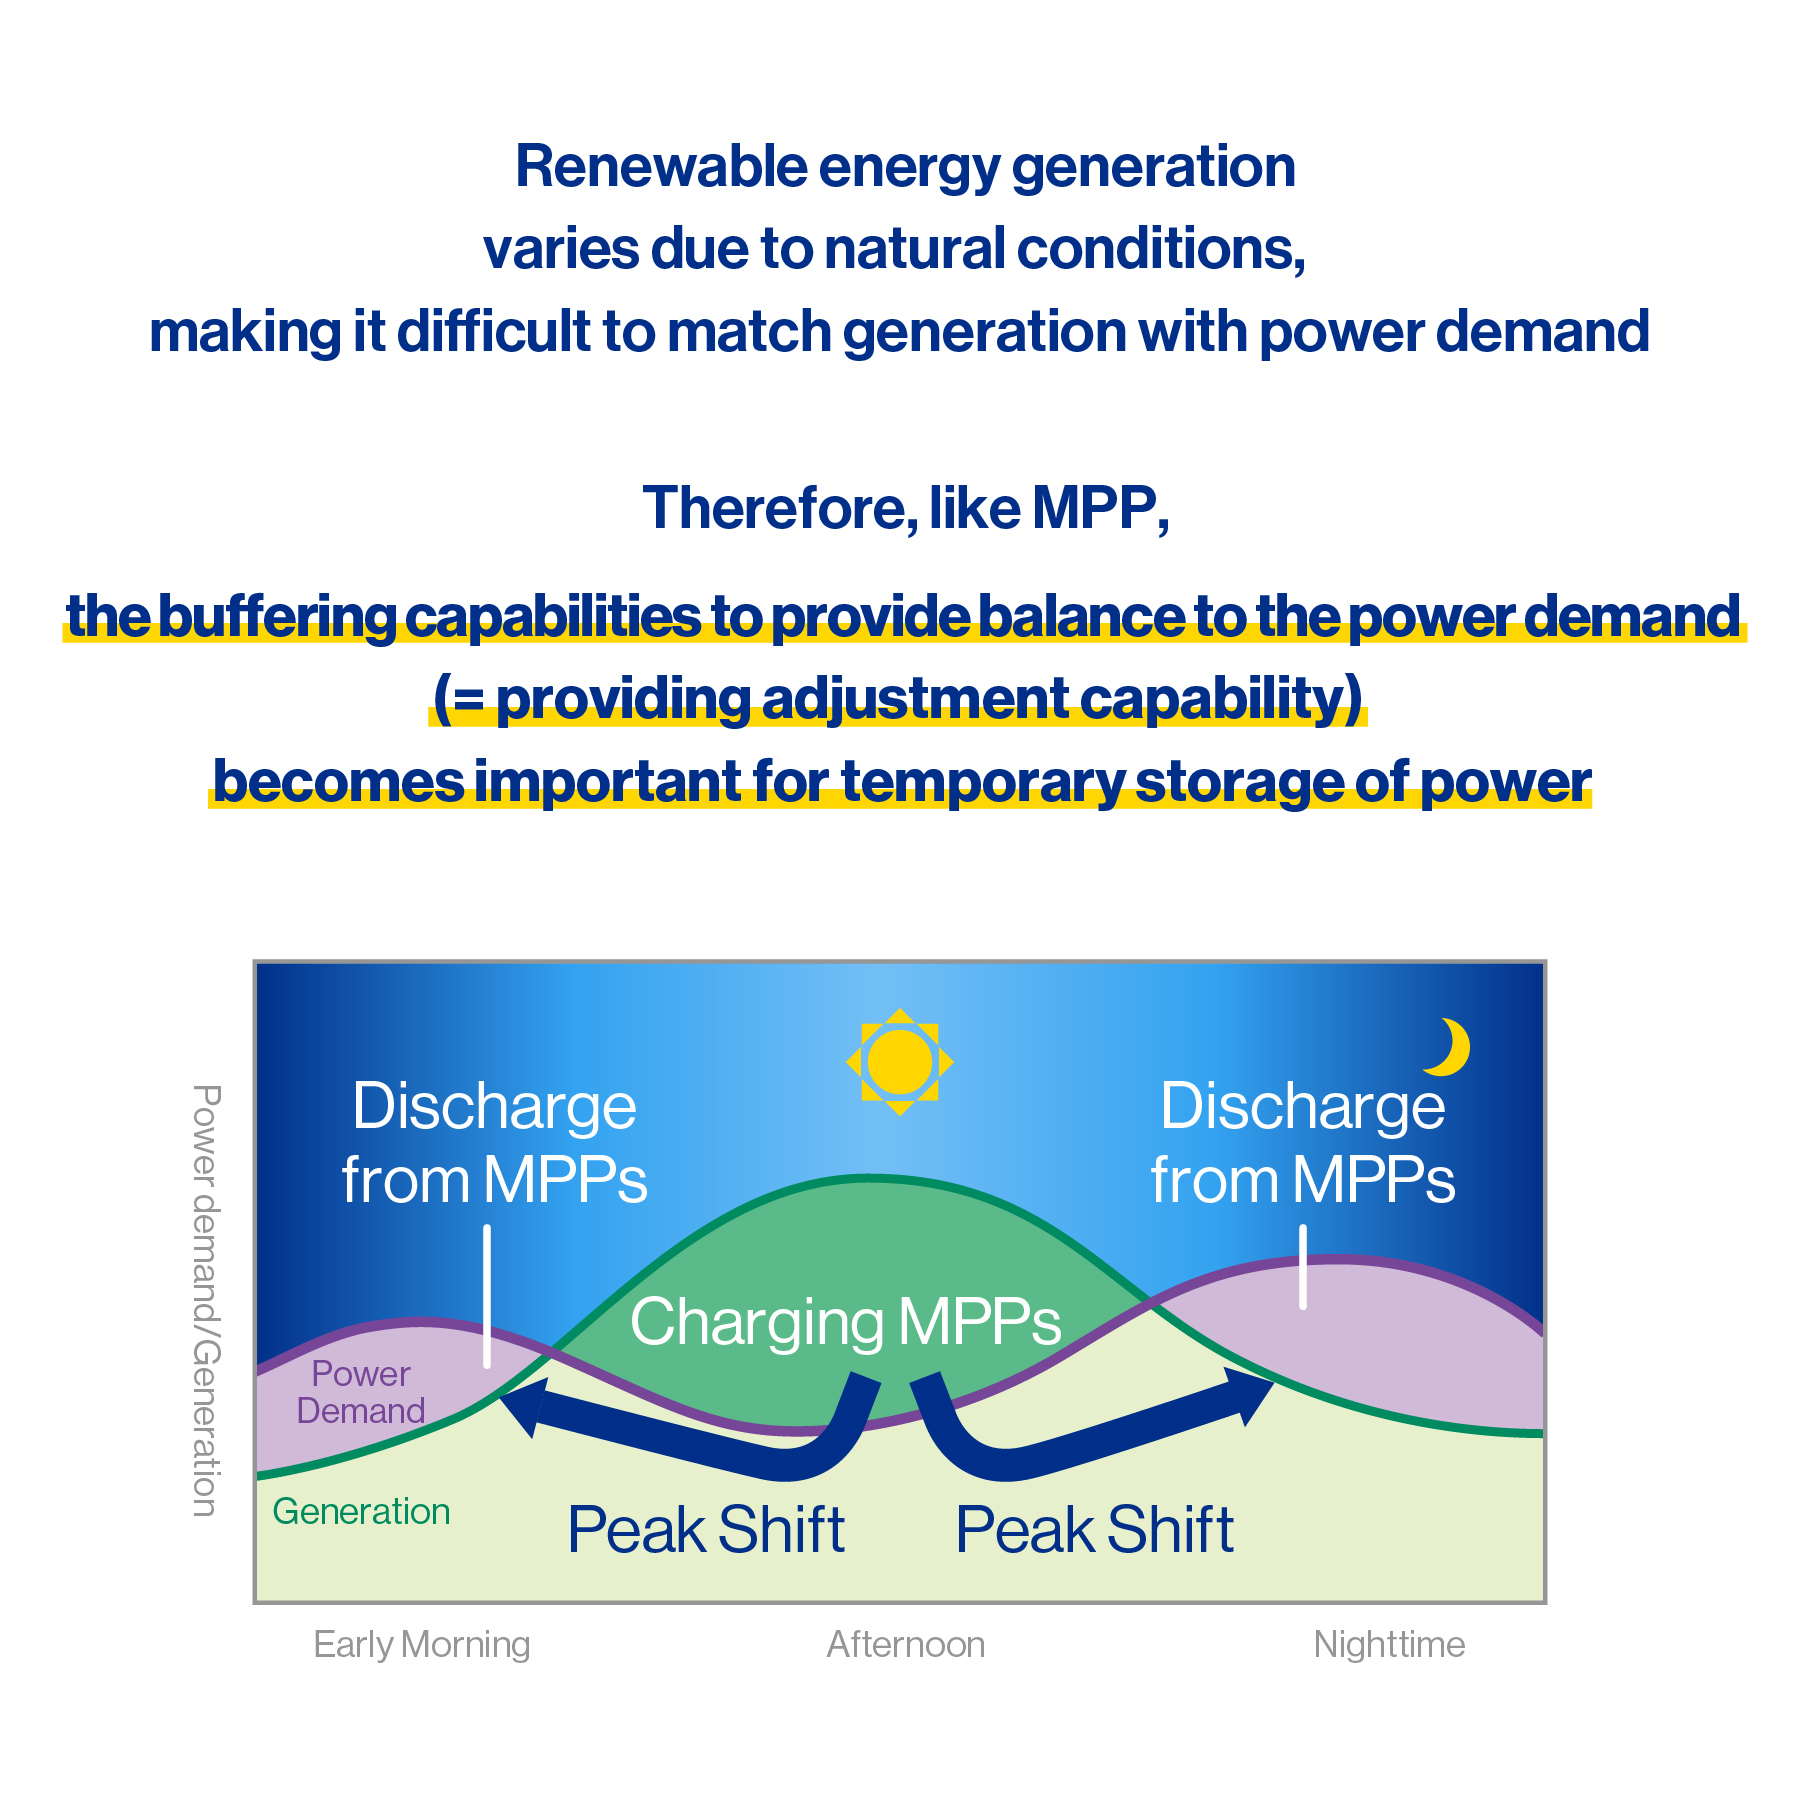 The Mobile Power Pack serves as a buffer for renewable energy (= adjustment capability)